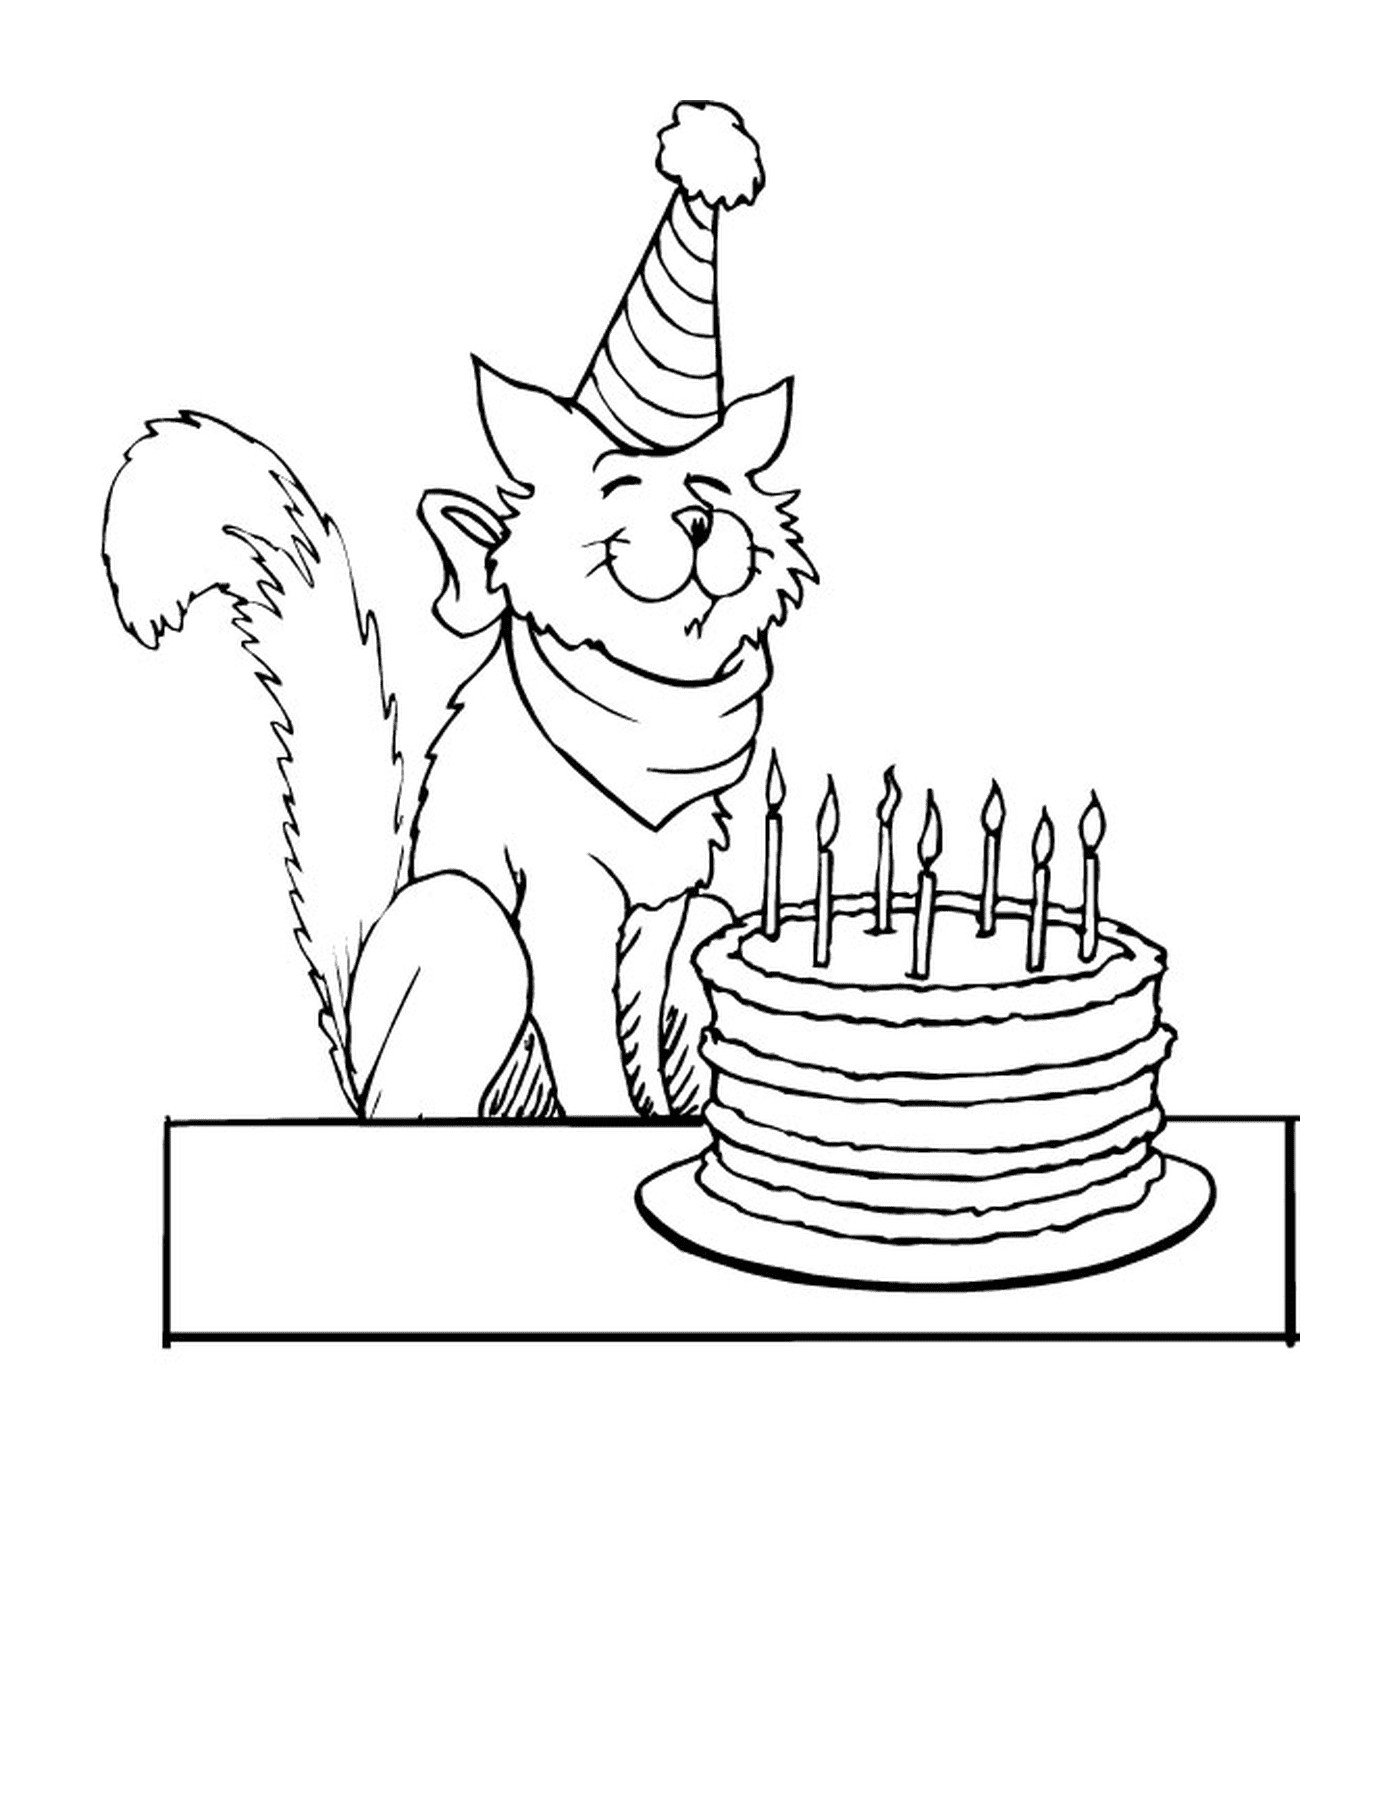  a cat sitting next to a cake with candles 